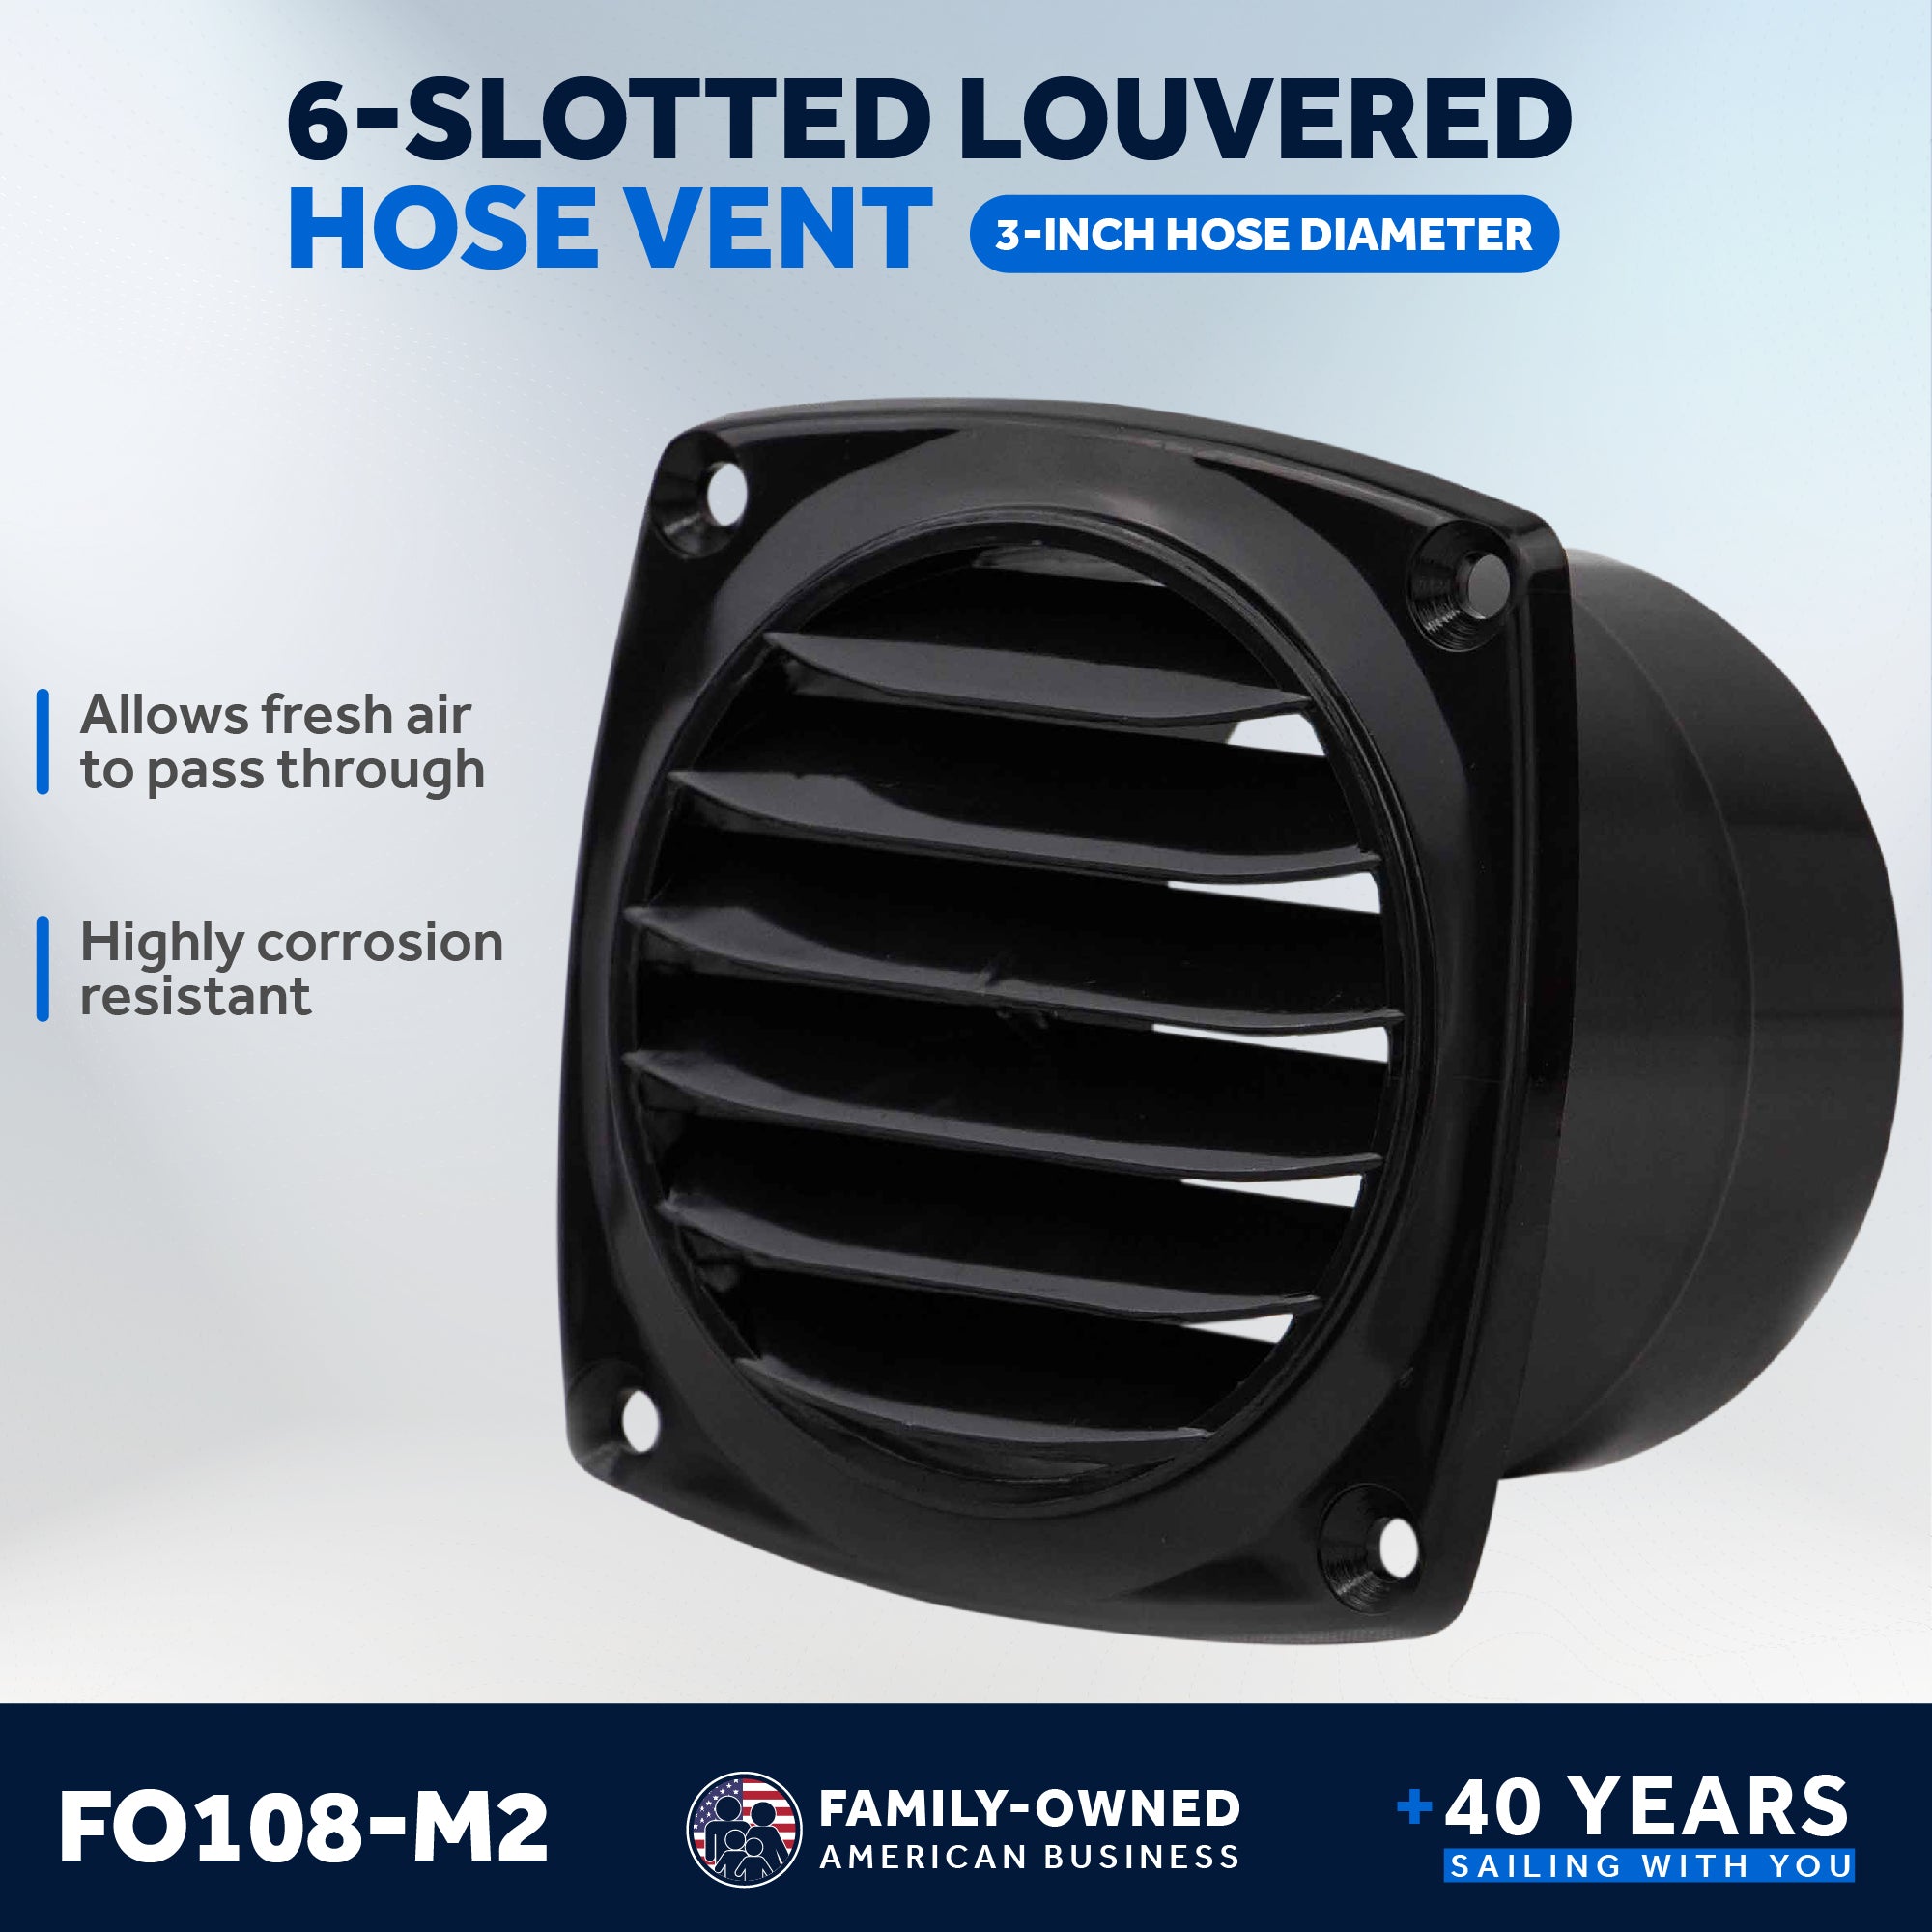 6-Slotted Louvered Hose Vent, 3-inch Hose Diameter, Black, 2-Pack - FO108-M2